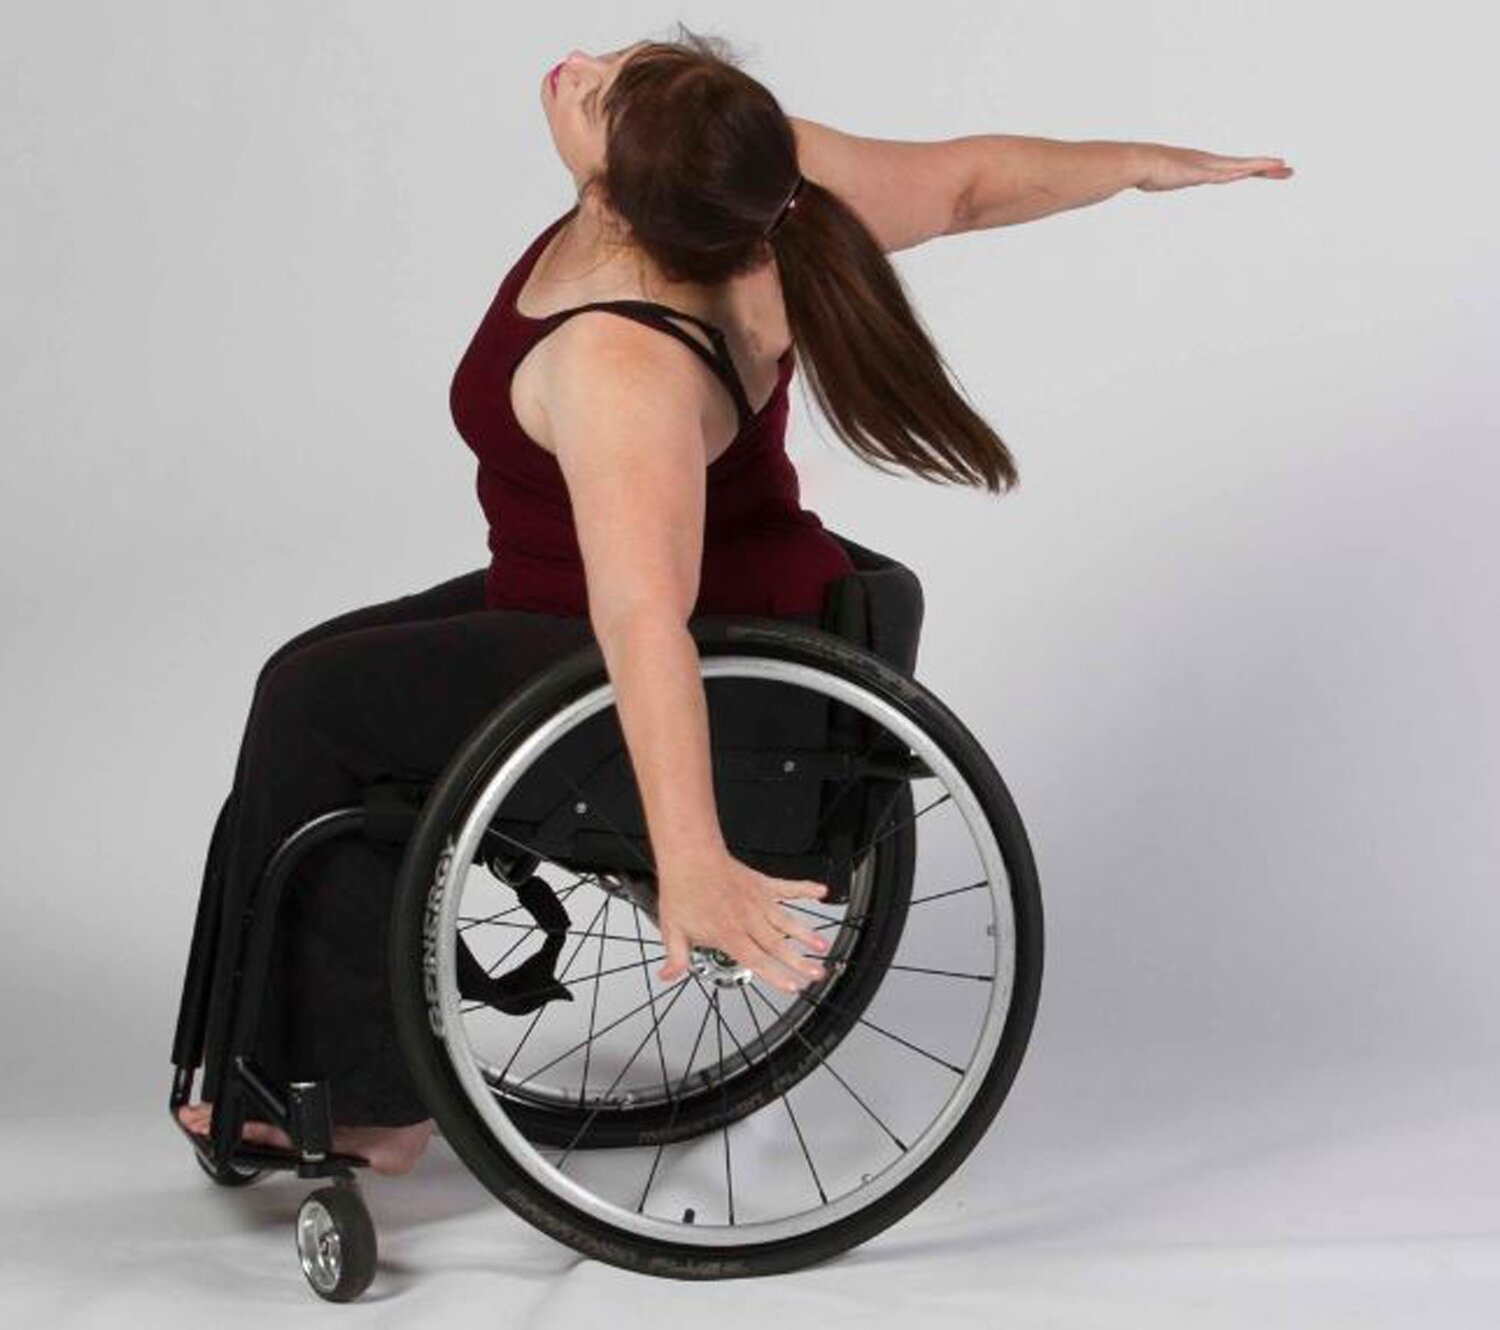 Professional physically integrated dancer and chair user Lindy “Oji” Dannelley dances in her chair.